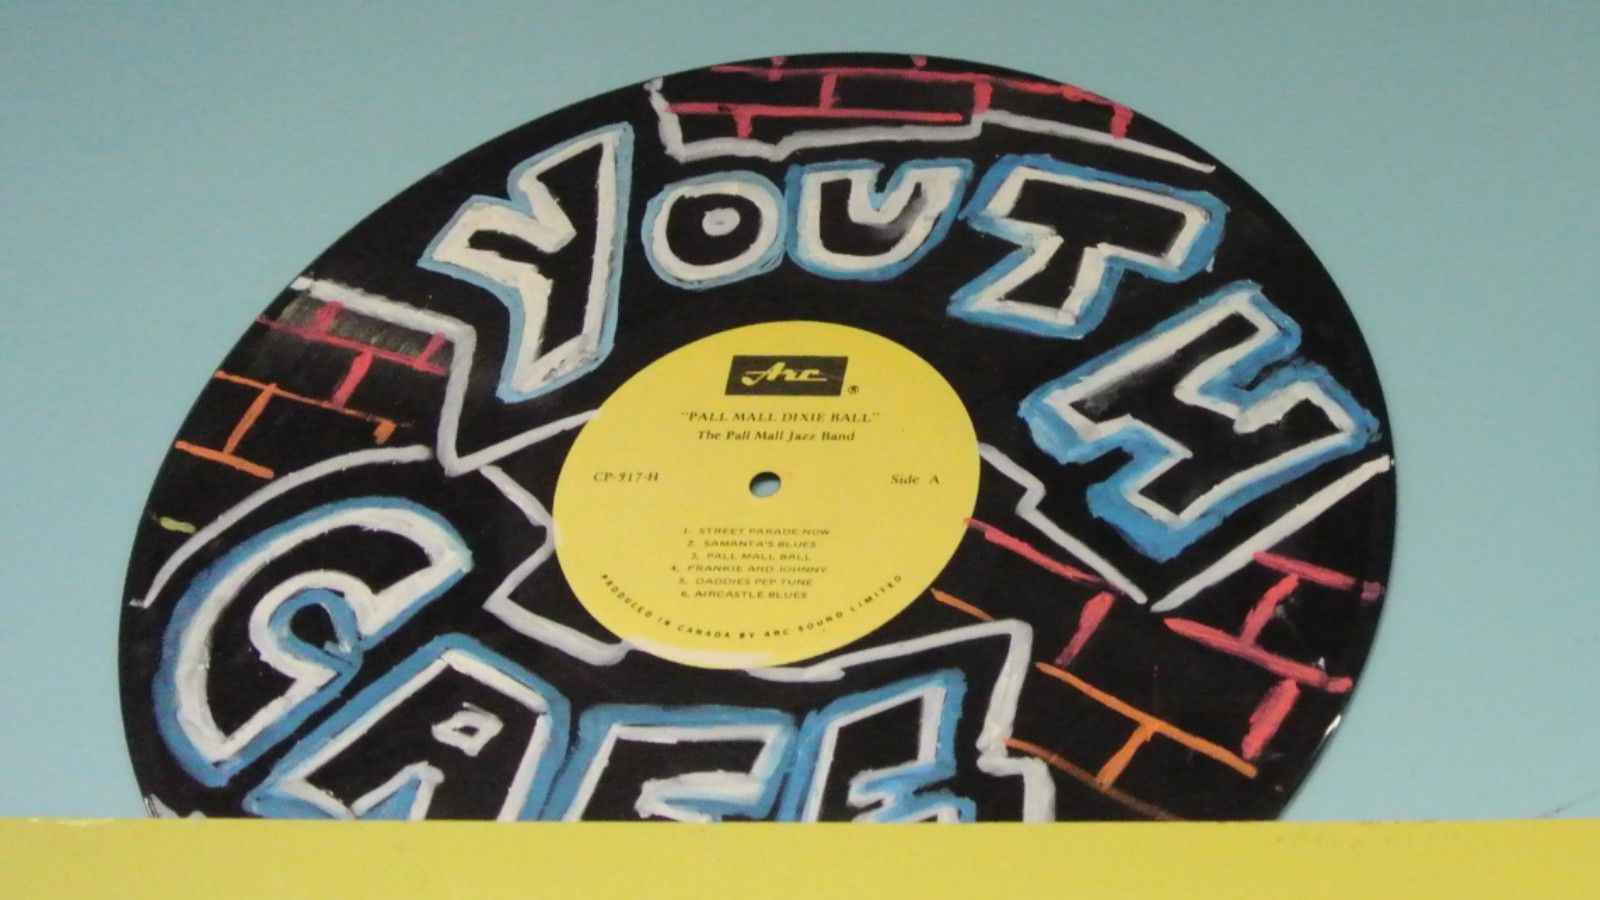 An LP record with youth cafe painted on it. banner image